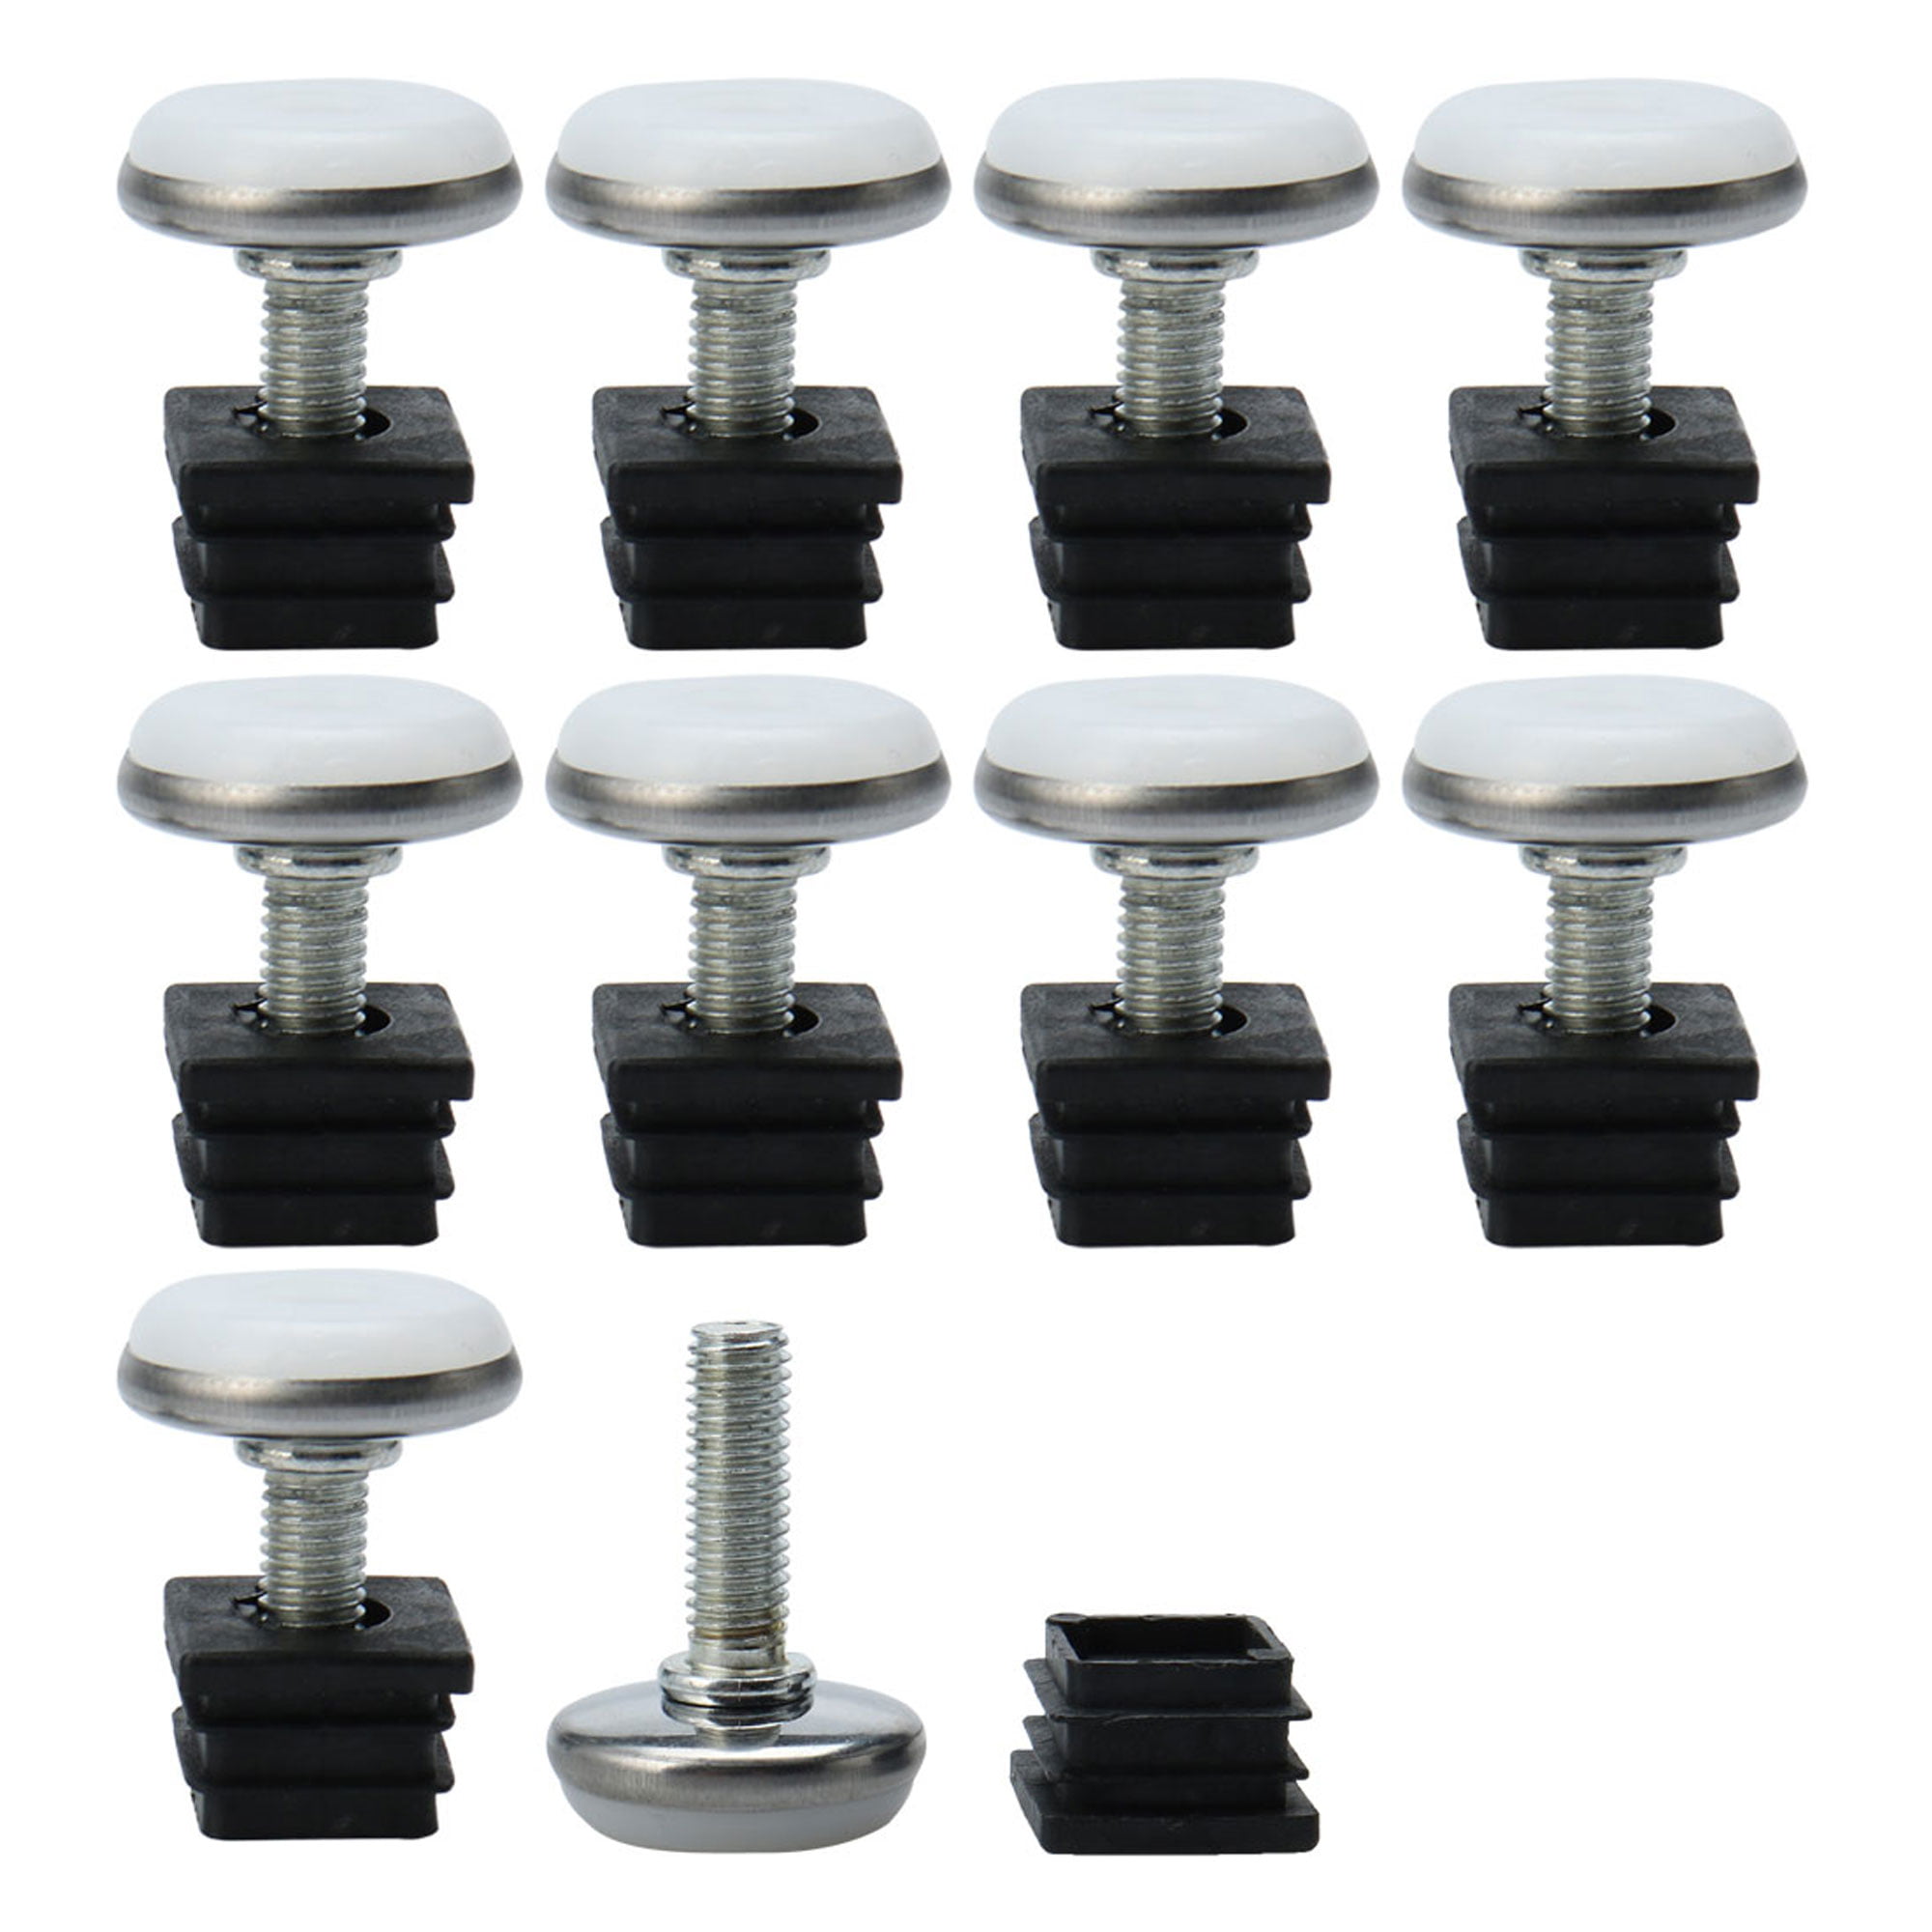 uxcell Square Table Desk Tube Insert Adjustable Leveling Foot Kit 48mm x 48mm 4 Sets